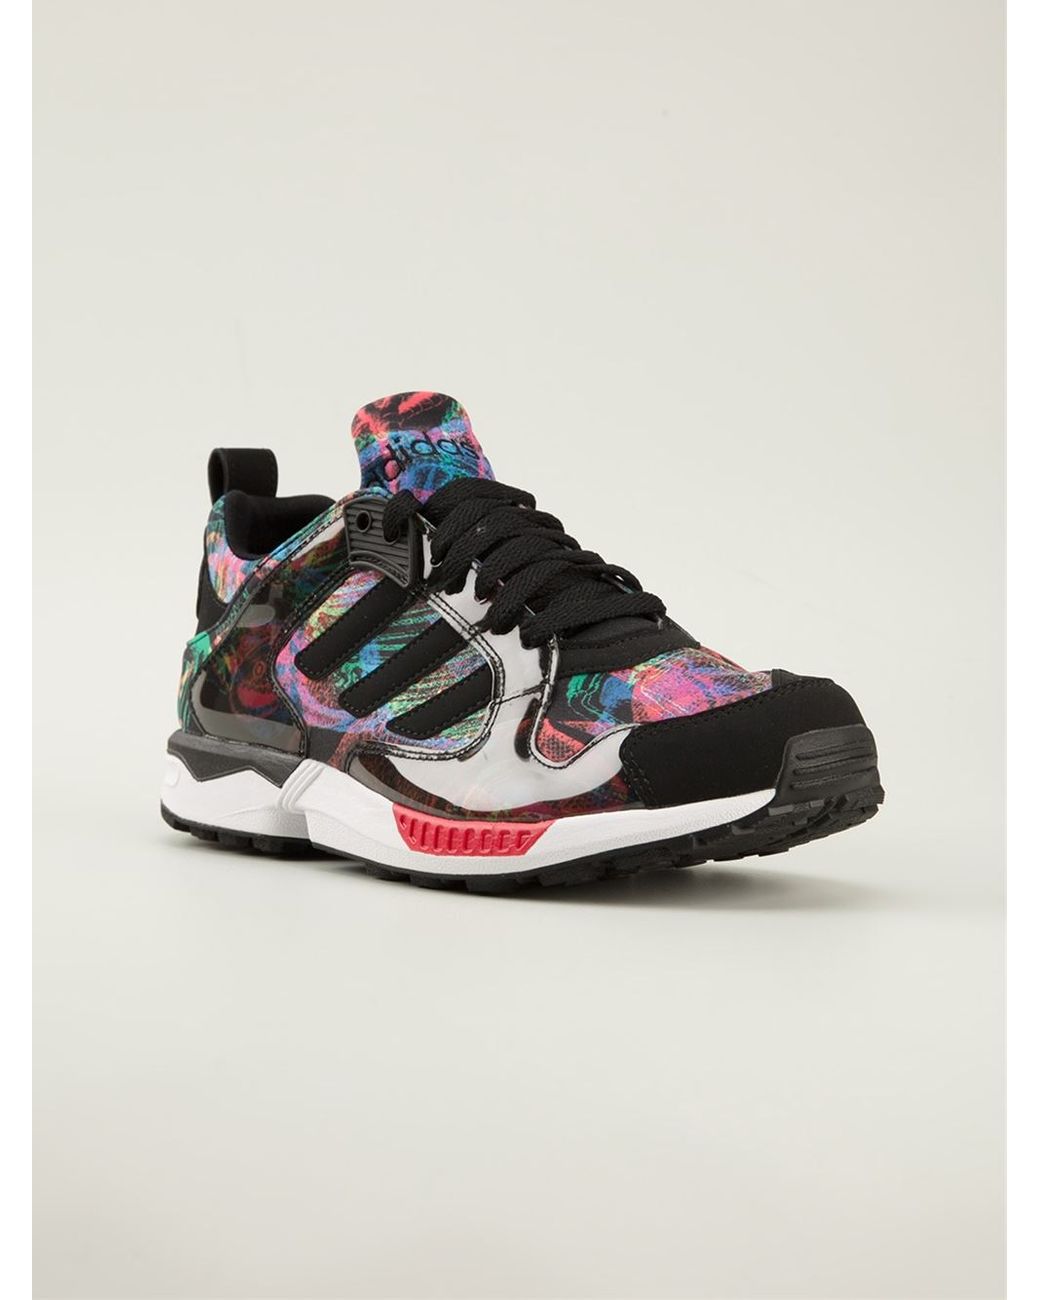 adidas 'Zx 500 Rspn' Psychedelic Print Sneakers in Black for Men | Lyst UK